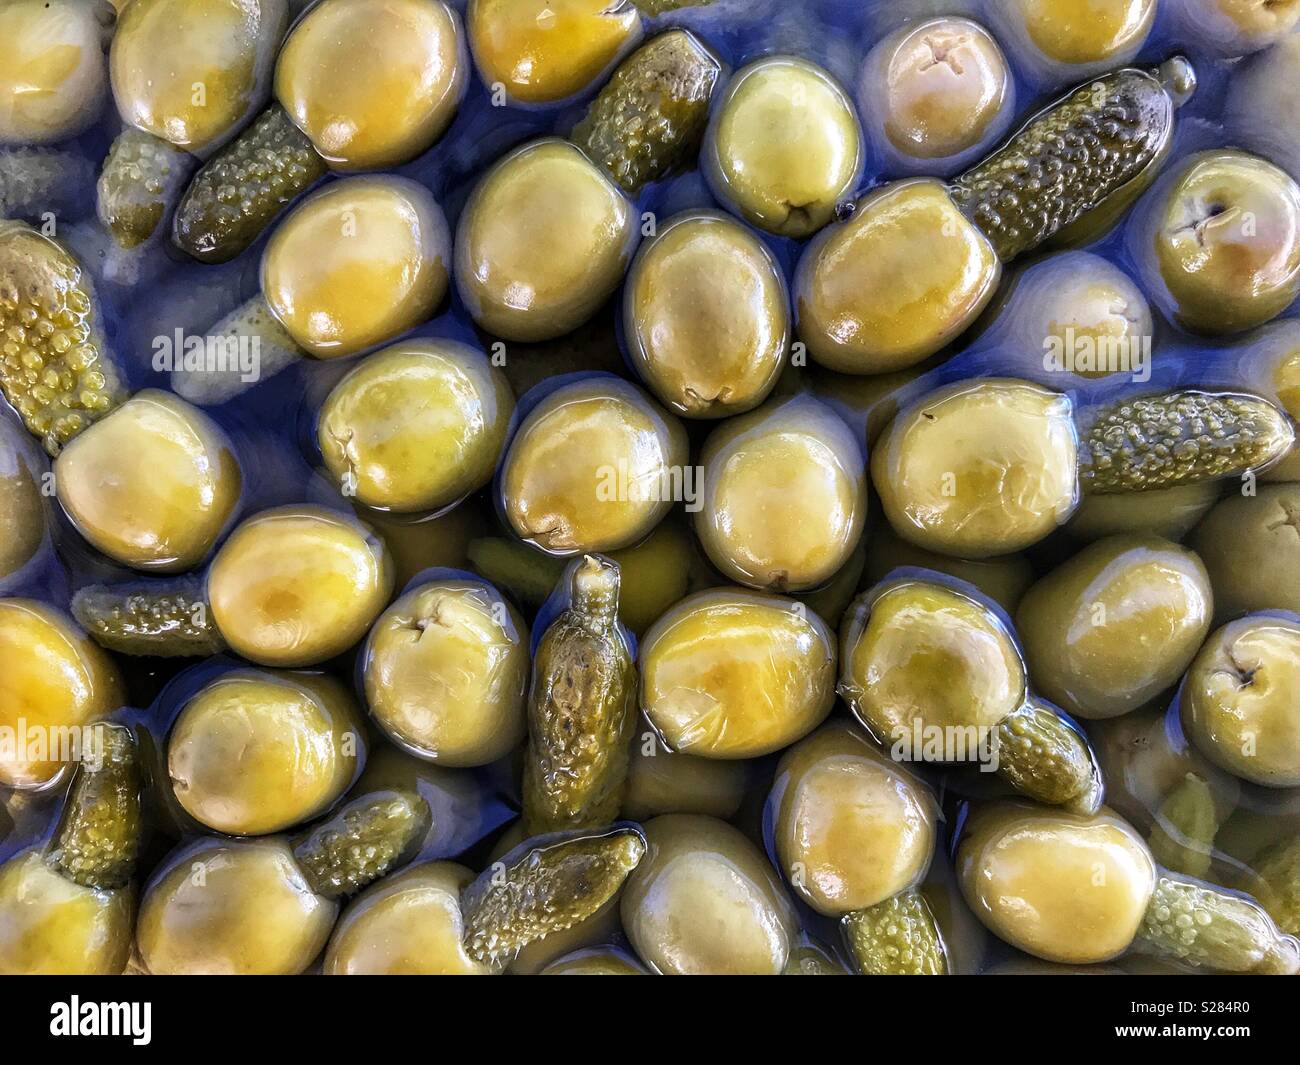 Olives stuffed with gherkins for sale on a market stall in Spain Stock Photo